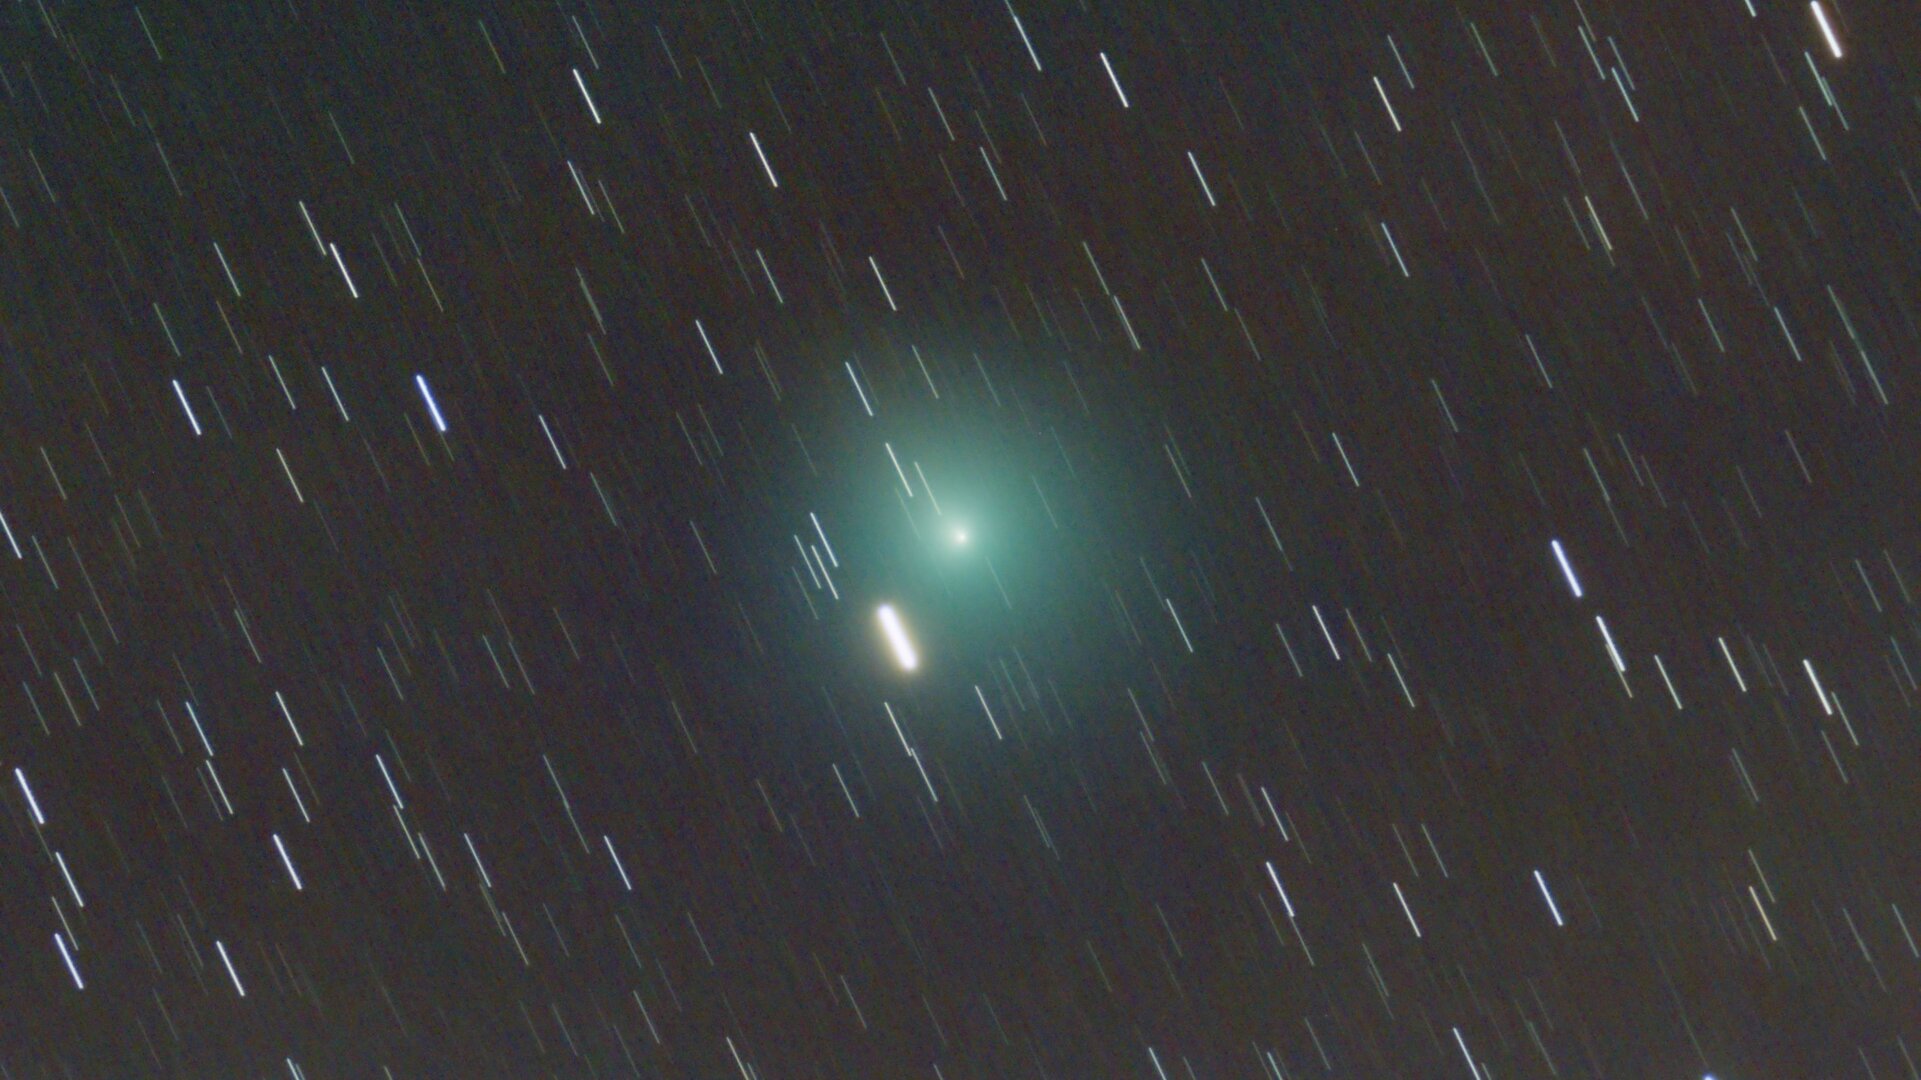 Comet from Madrid